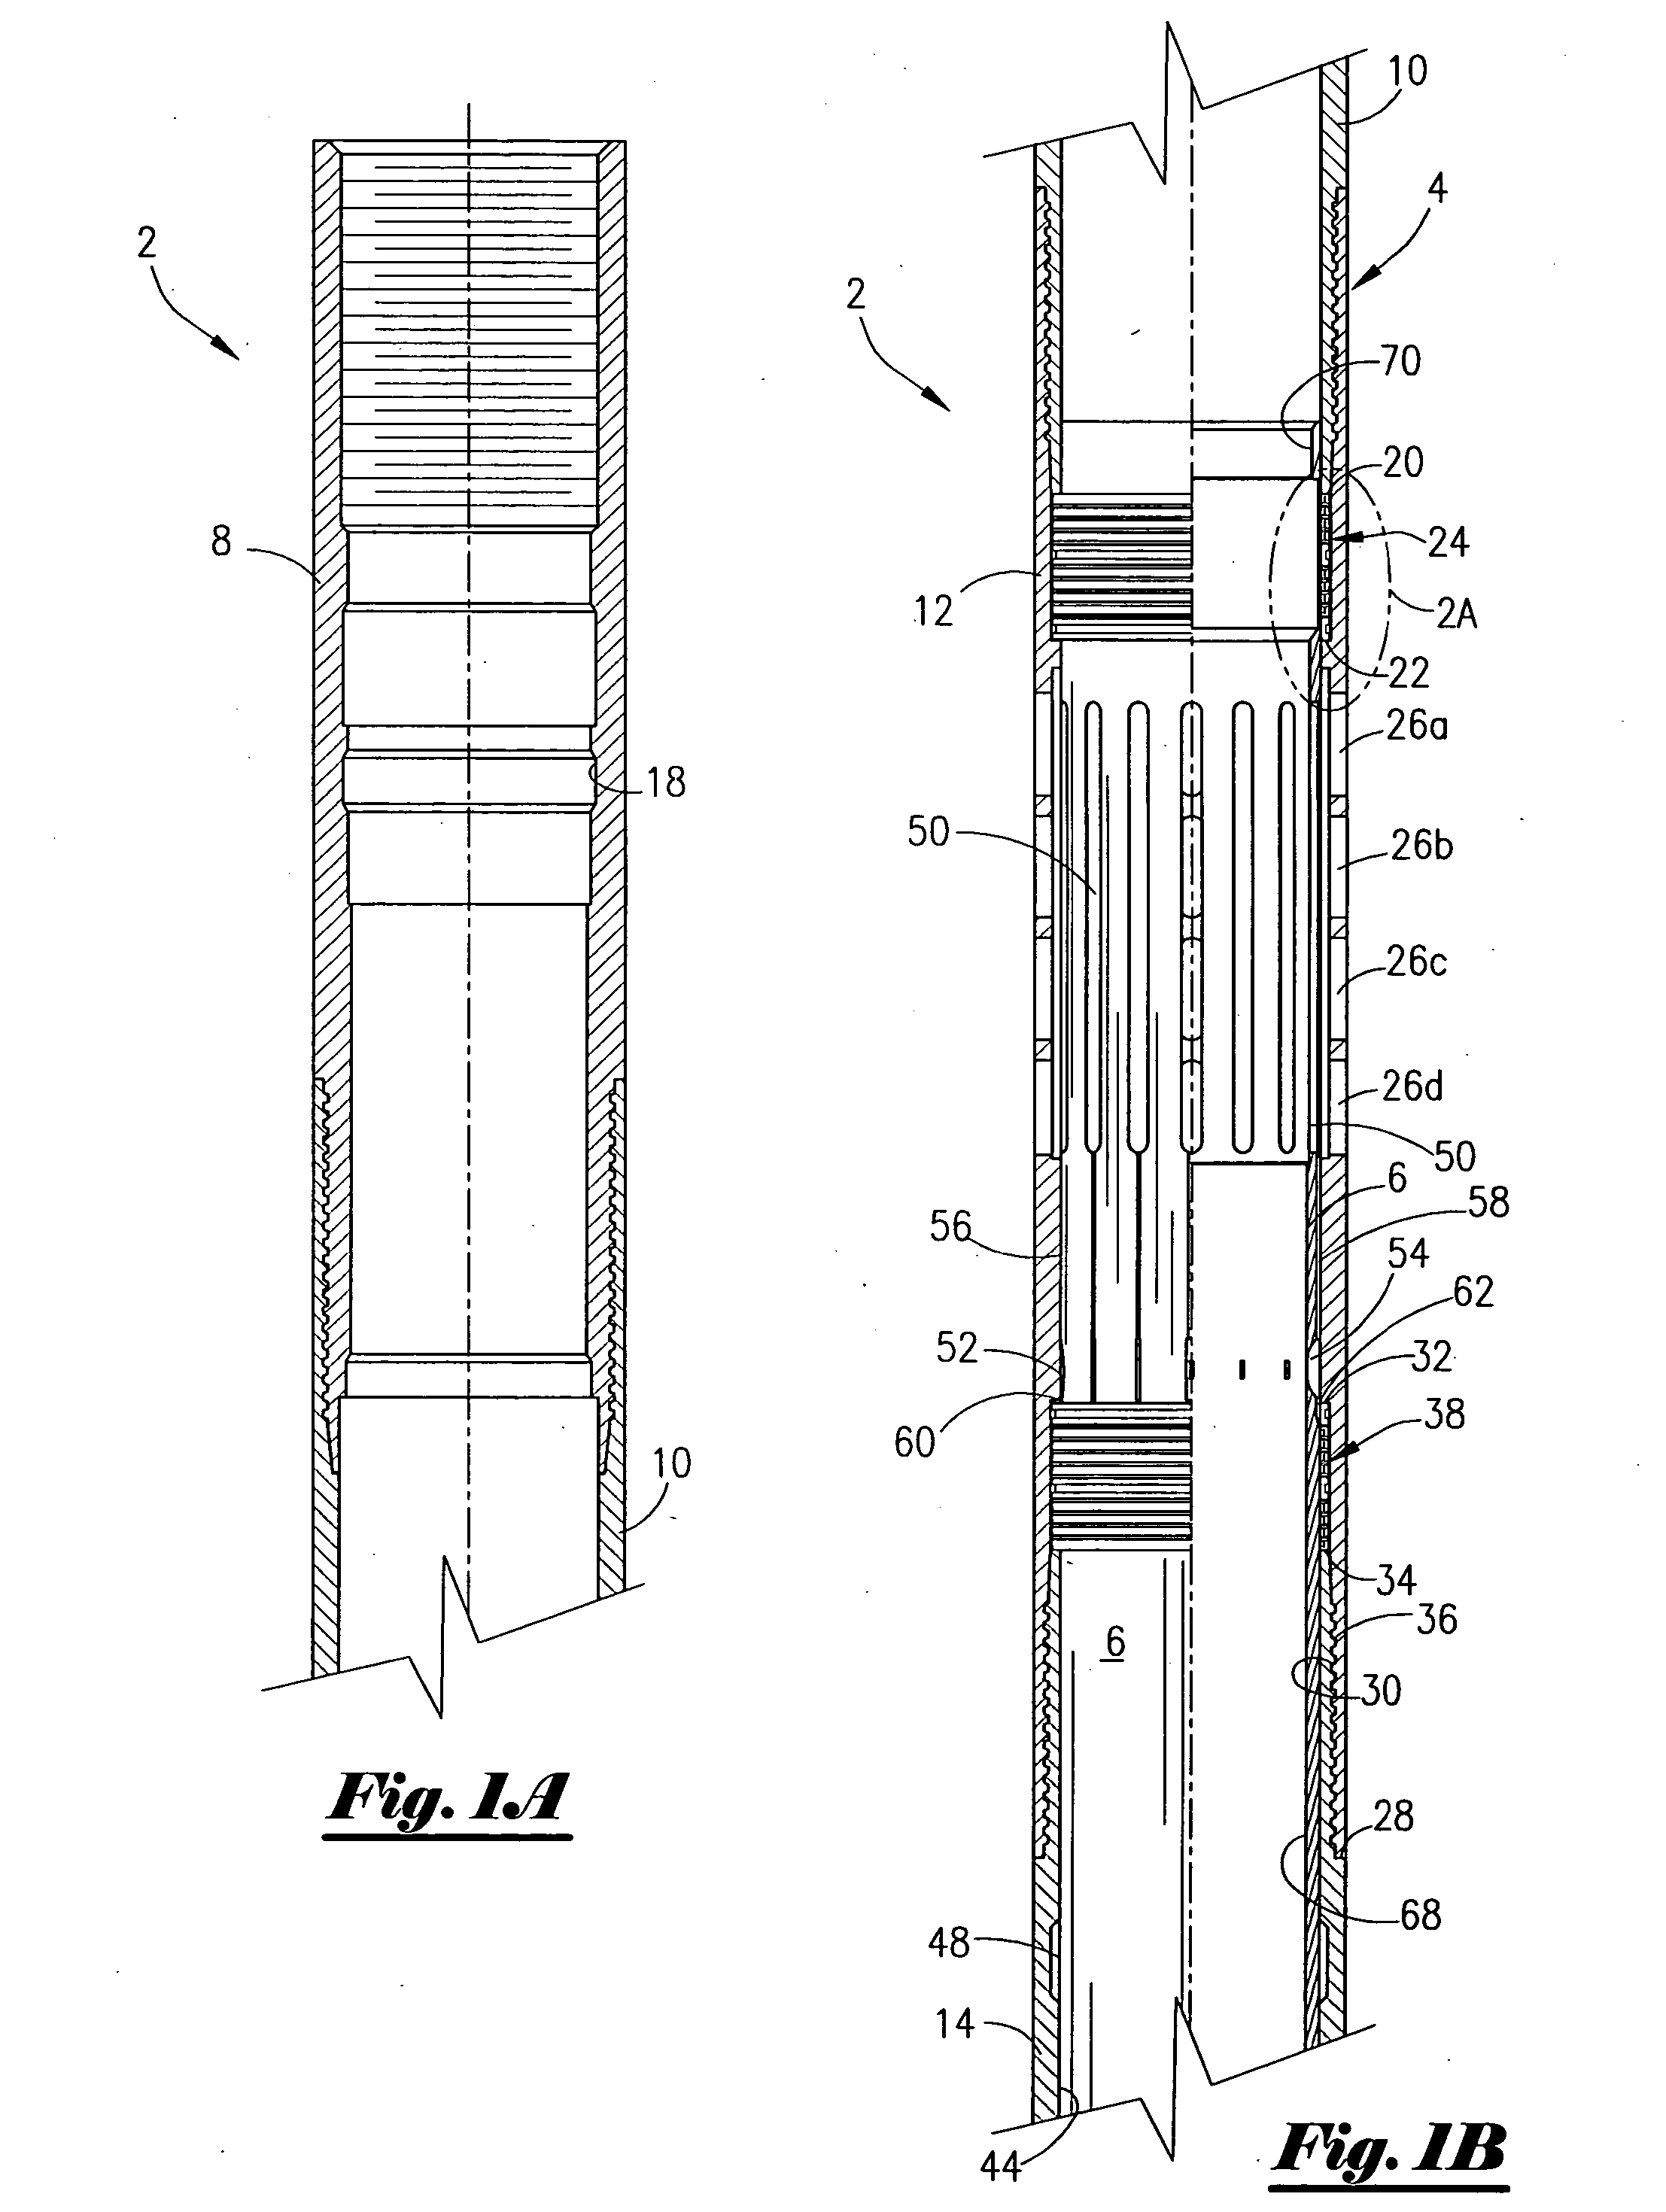 Valve apparatus with seal assembly